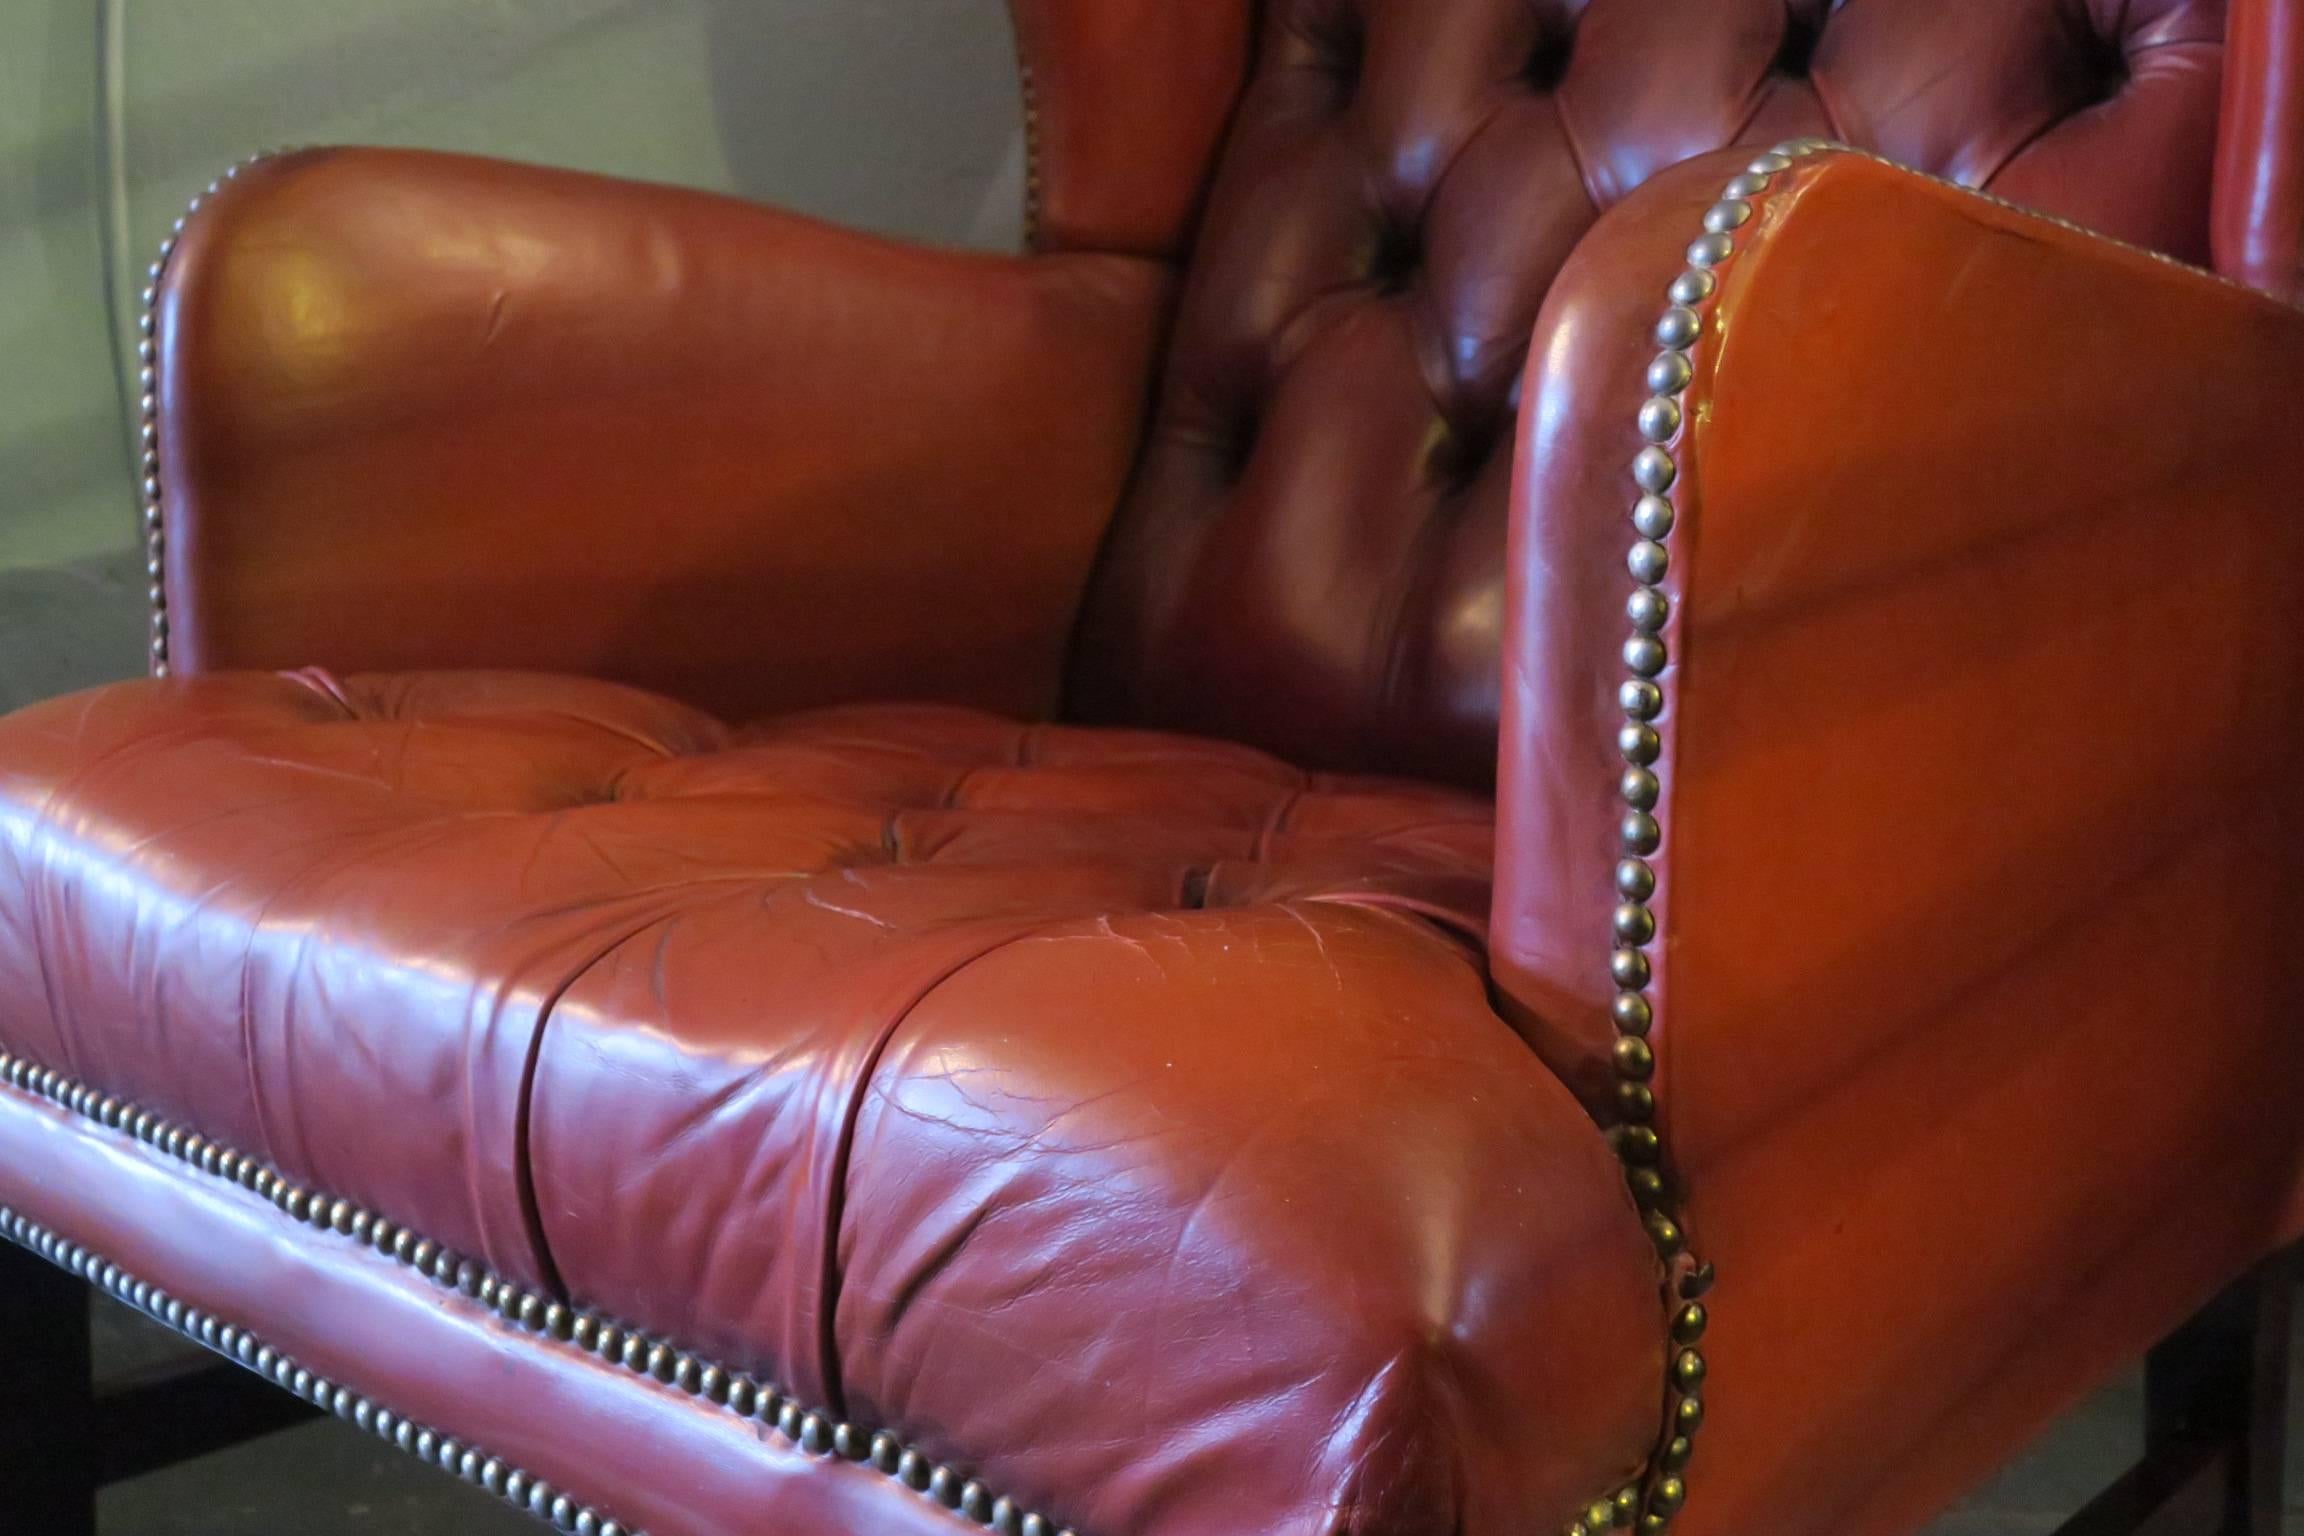 Vintage Chesterfield wingback chair in very warm brown tufted leather.

The apparent stripes on the side are shadows.

Shipping prices quoted for Germany and the UK.
For shipping to other countries please ask.